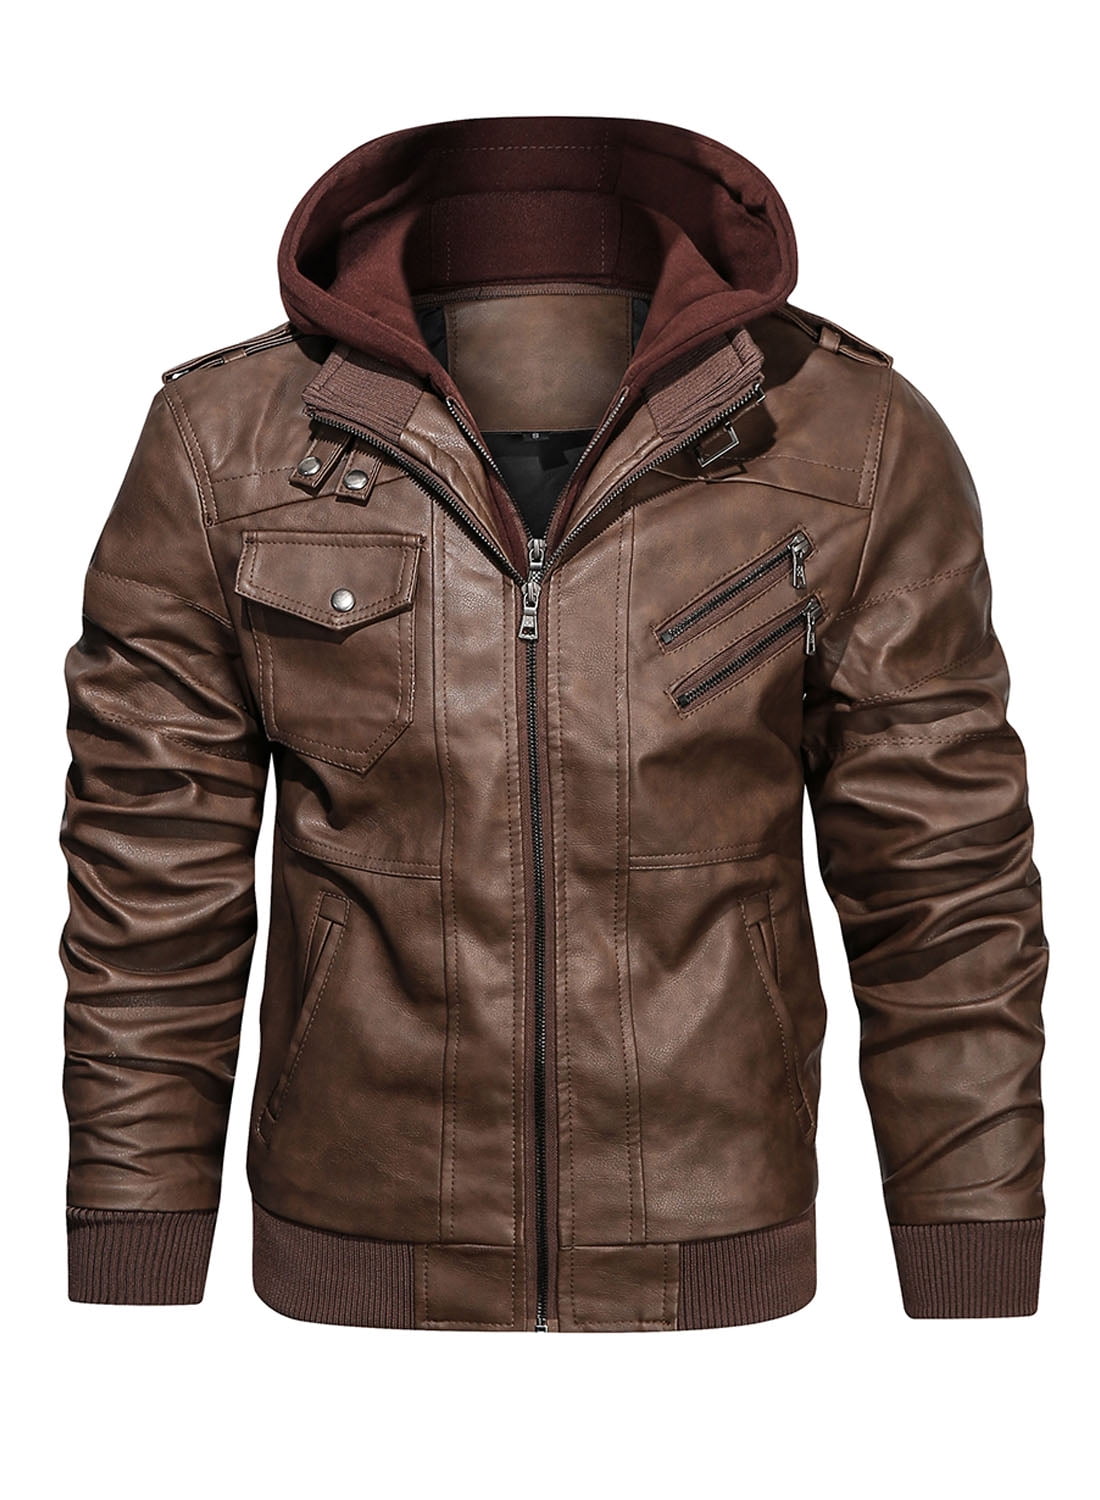 Hood Crew Men’s PU Faux Leather Motorcycle Bomber Jacket With a Removable Hood 